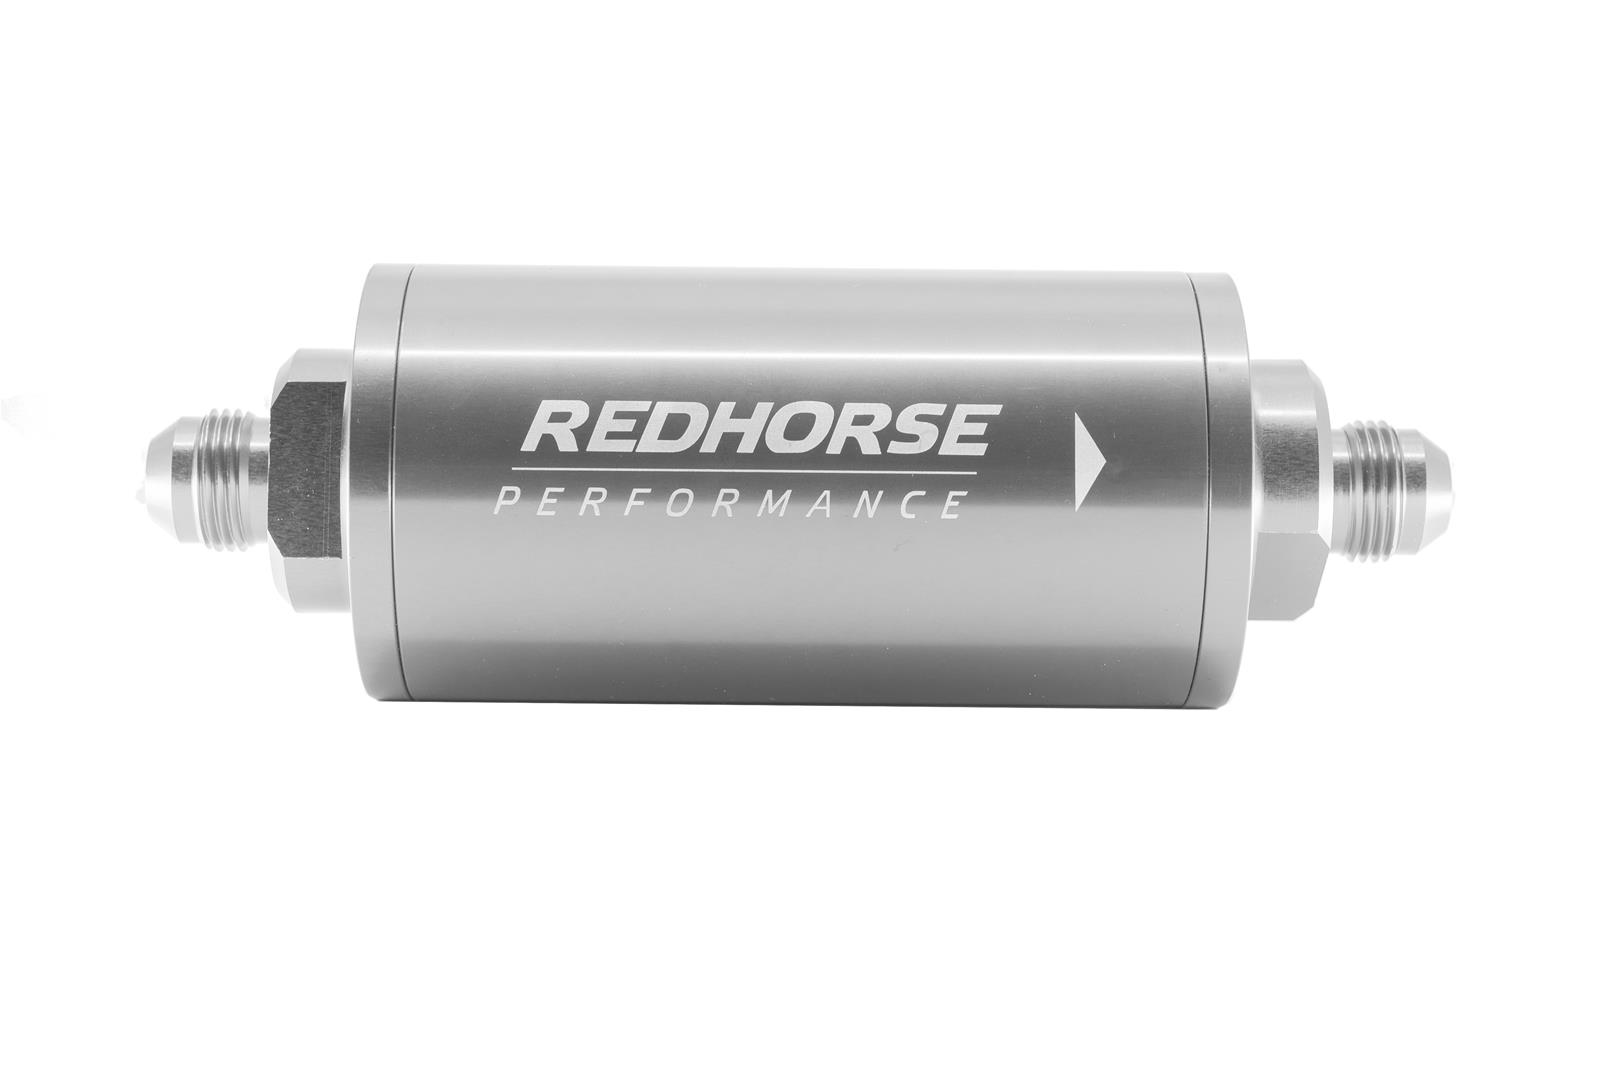 Redhorse Performance 4651-10-5-100 6in Cylindrical In-Line Race Fuel Filter w/ 100 Micron S.S. element - 10 AN